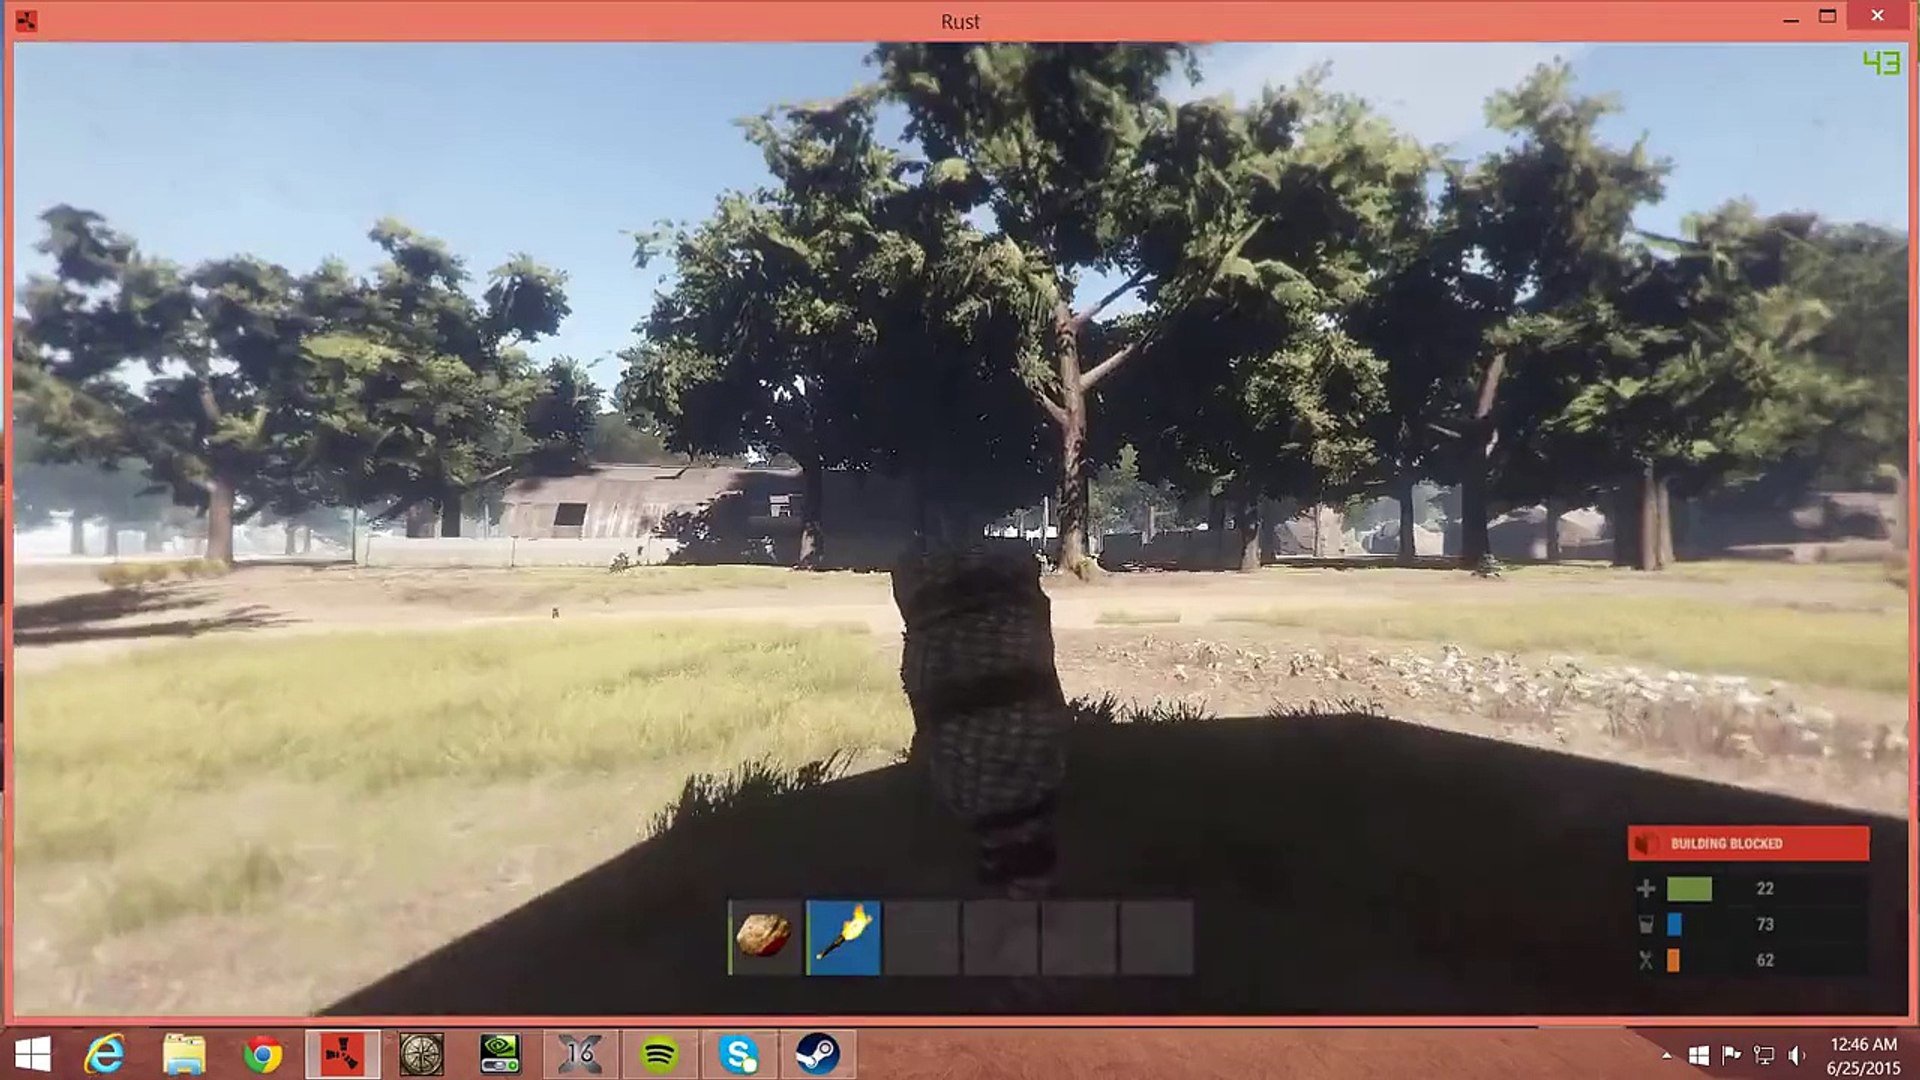 Nvidia Gtx 960 2gb Rust Fps Test And Overclock Settings Video Dailymotion